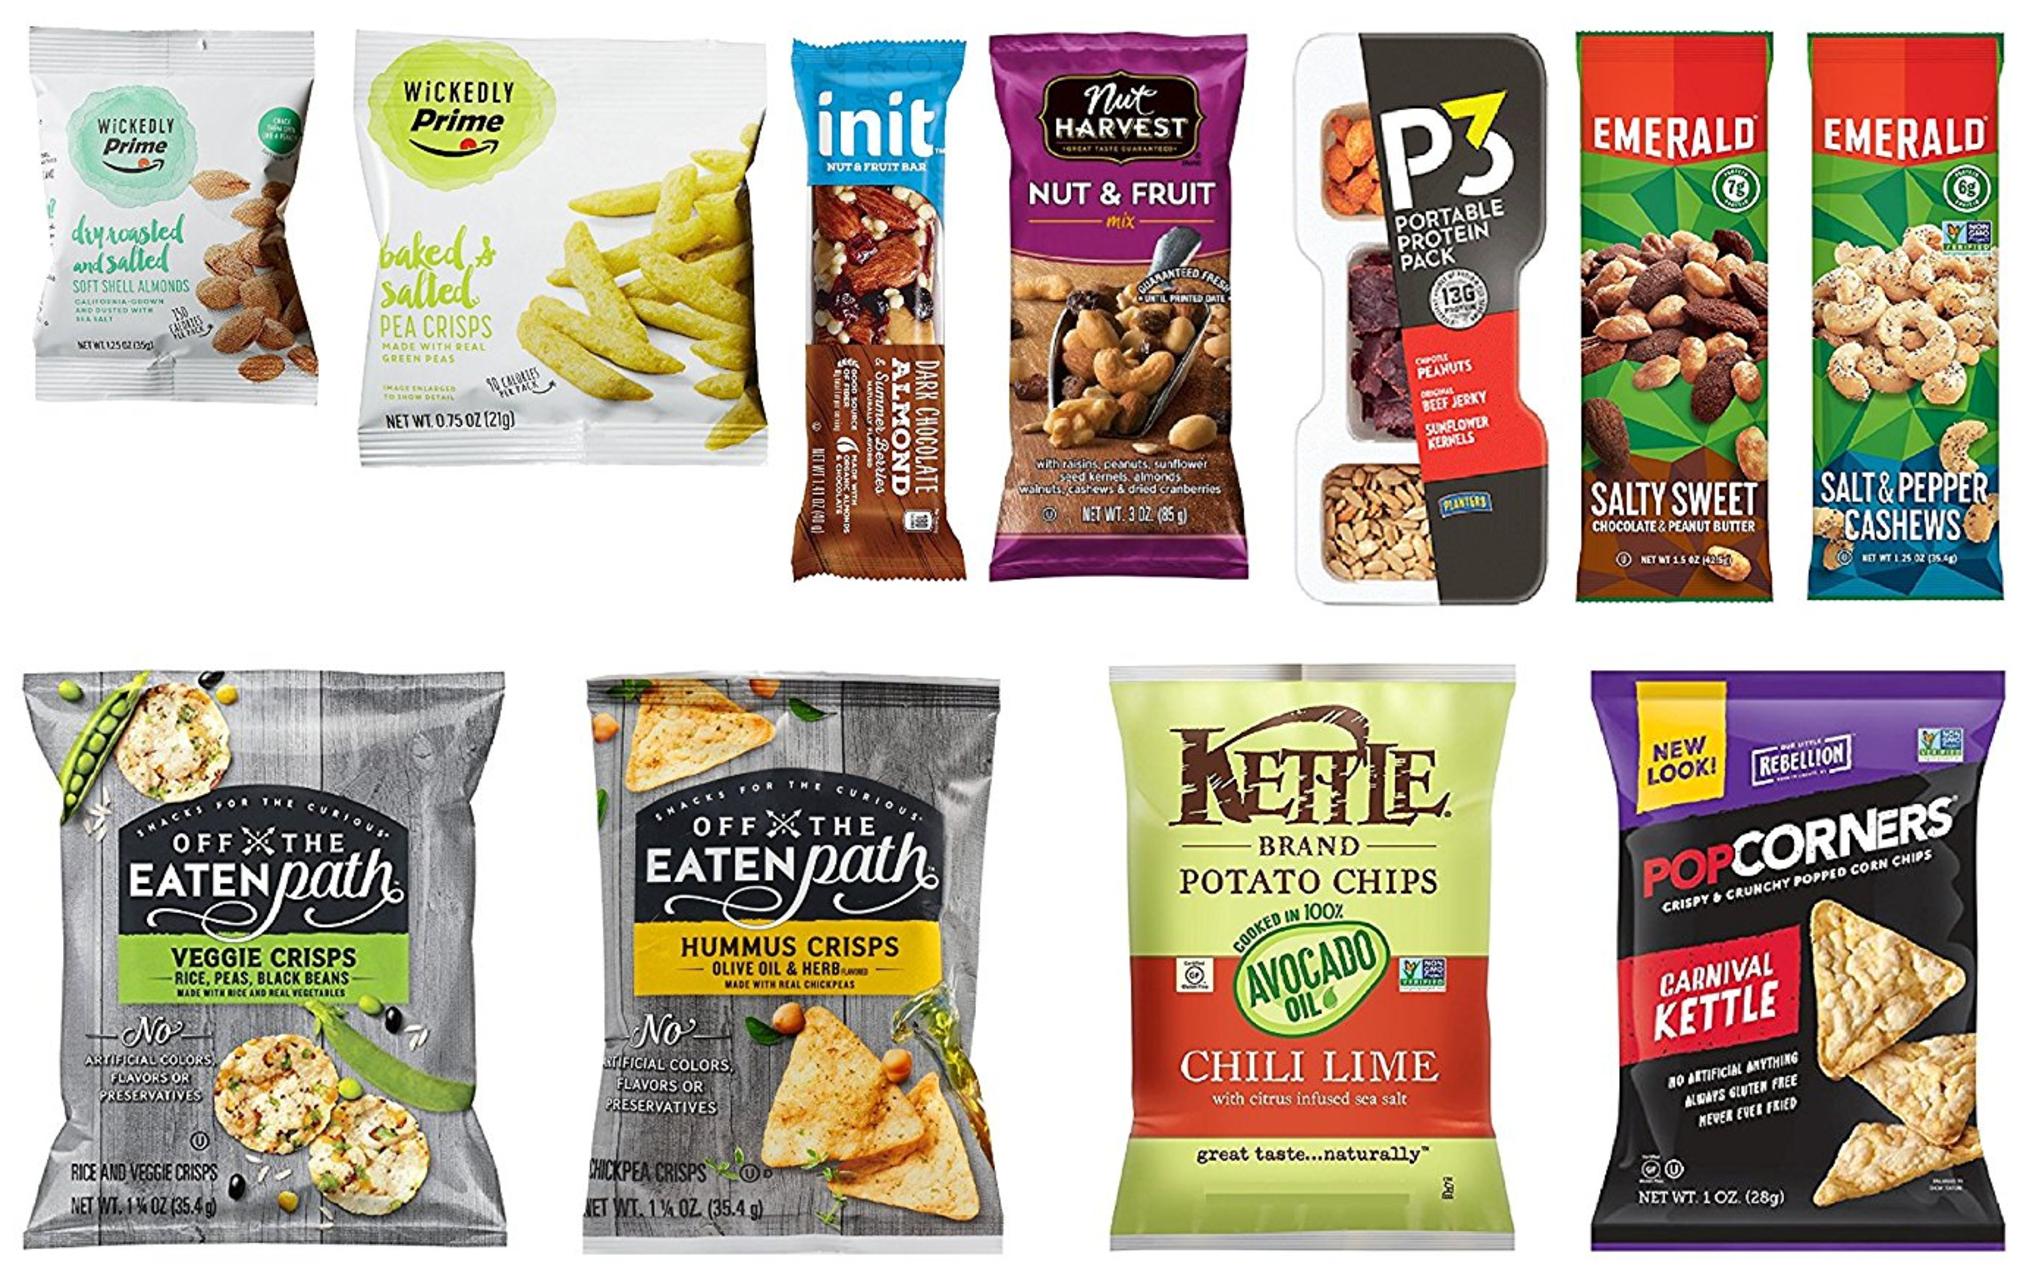 *HOT* Snack Sample Box (get a $9.99 credit toward future purchase of select snack products)